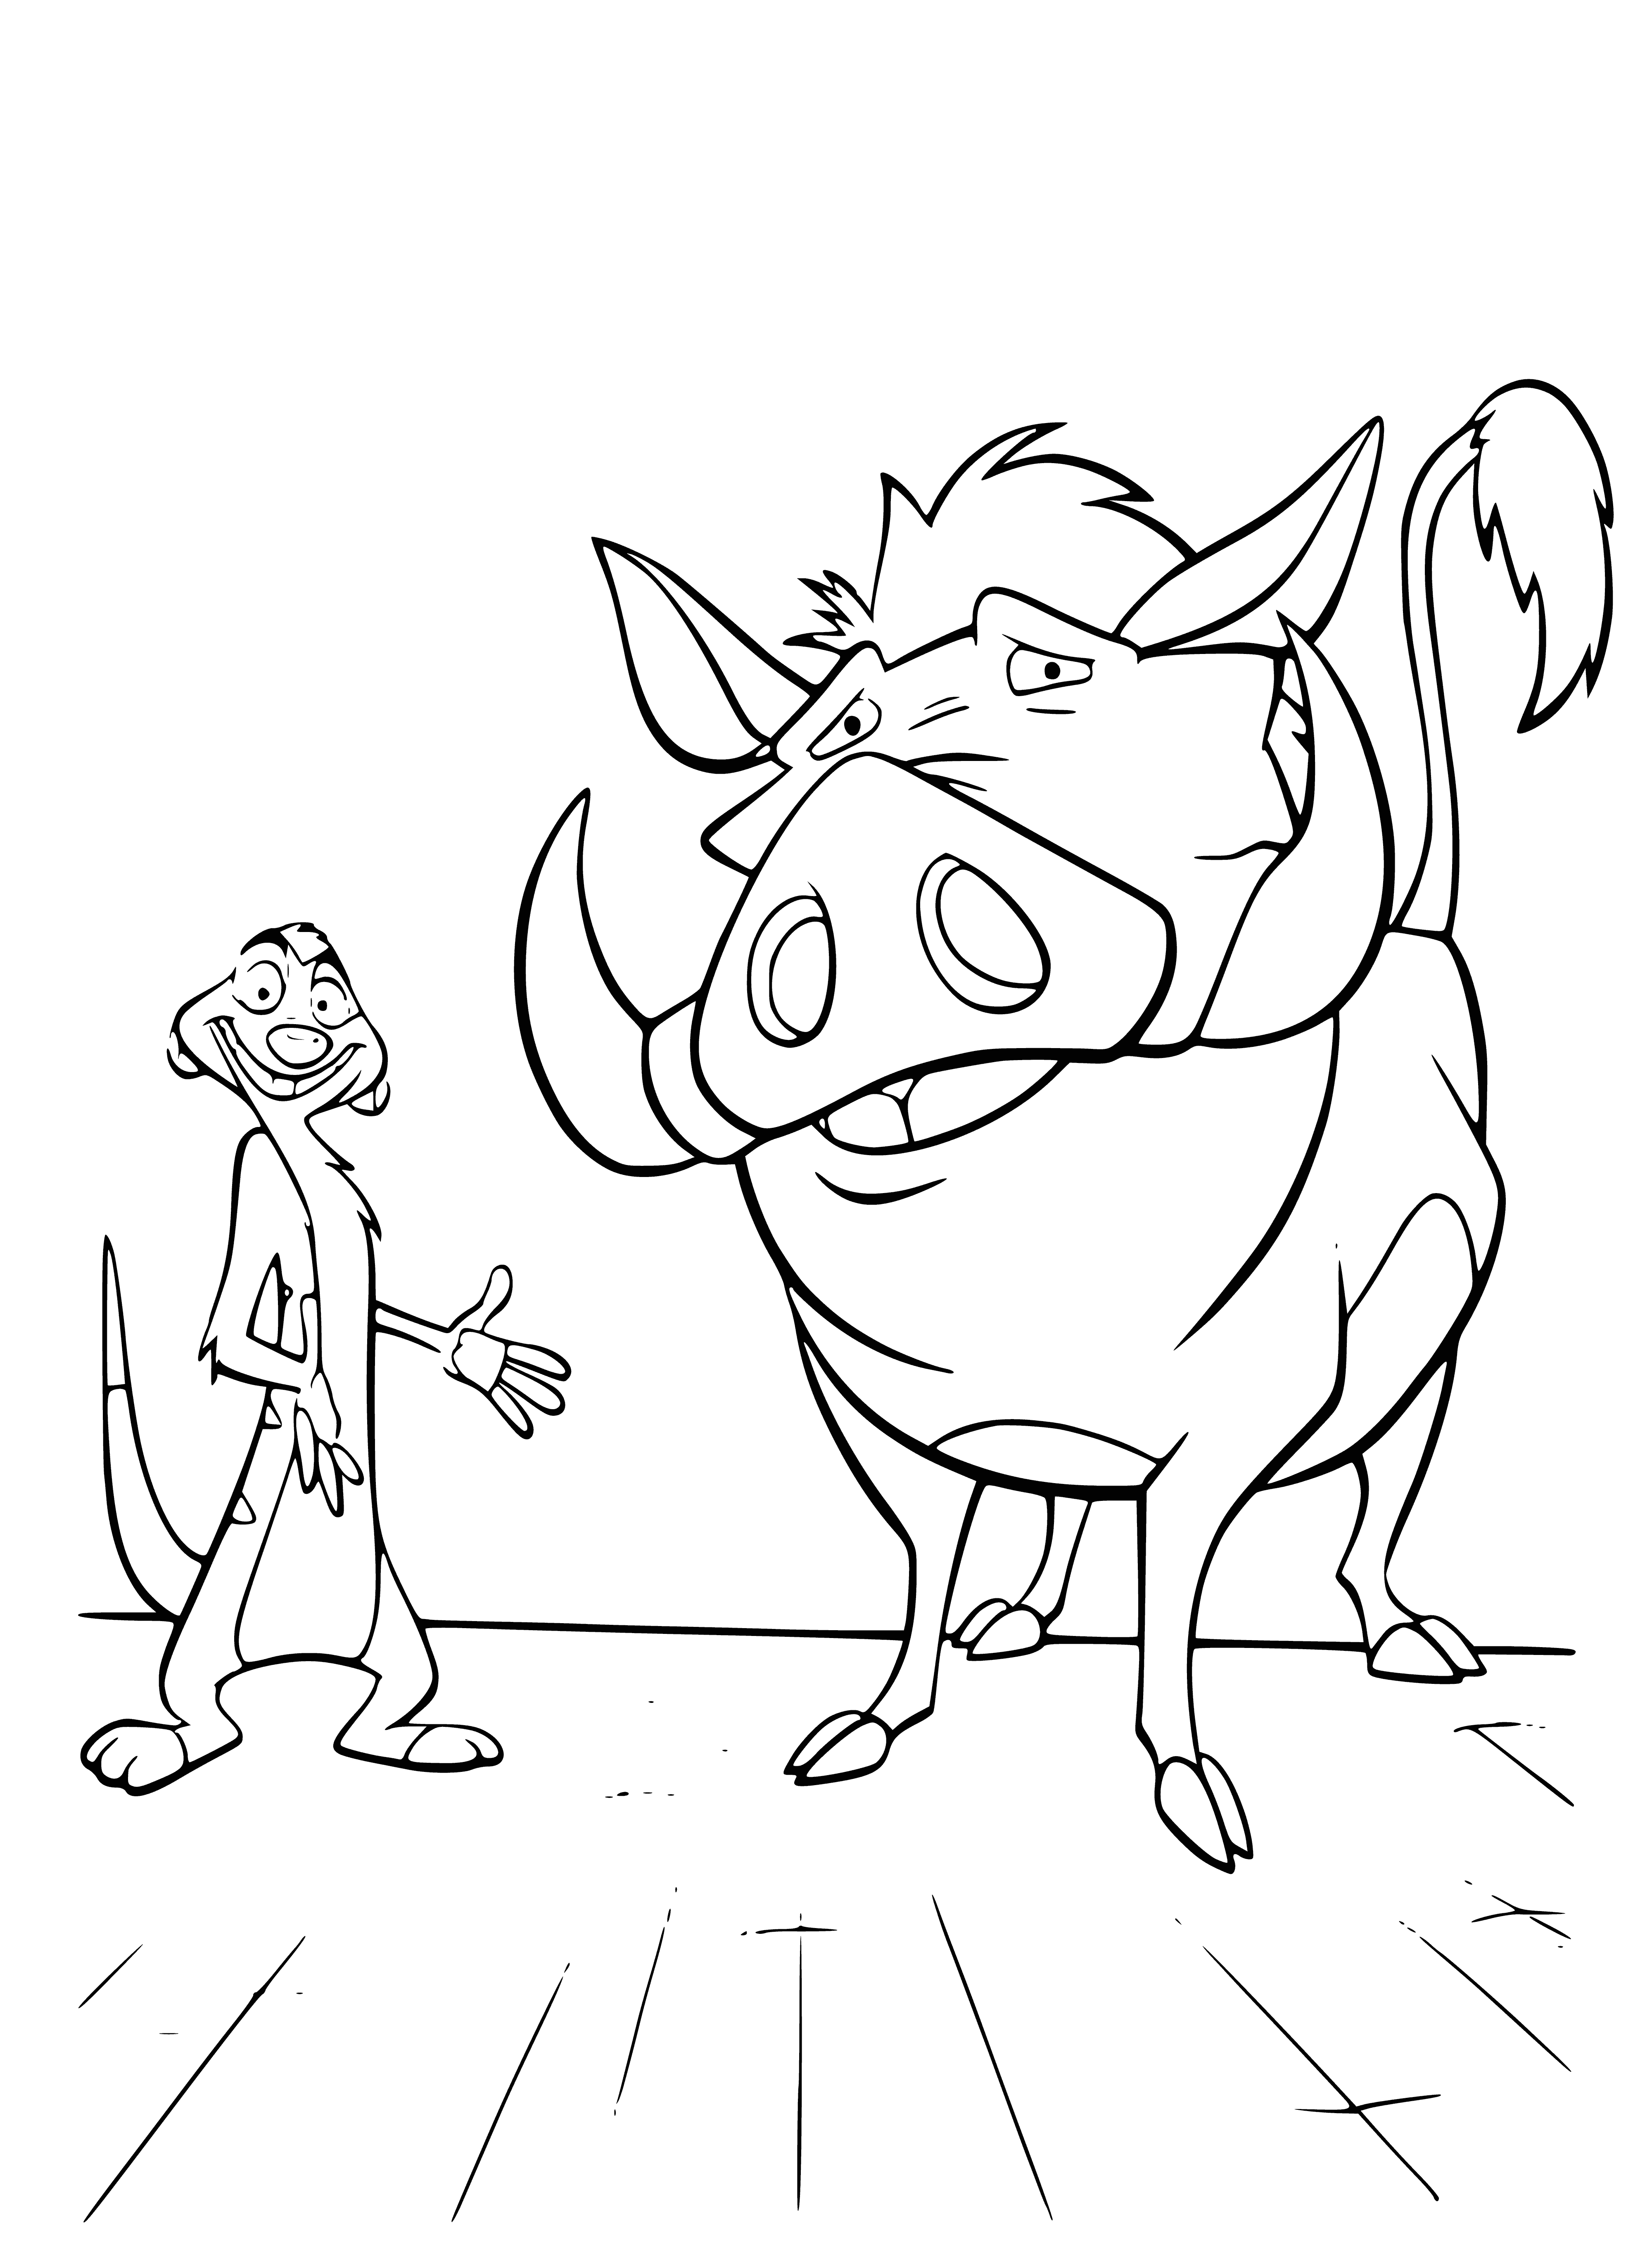 coloring page: Timon & Pumbaa from The Lion King happily view a savanna; Timon's a meerkat, Pumbaa's a warthog.